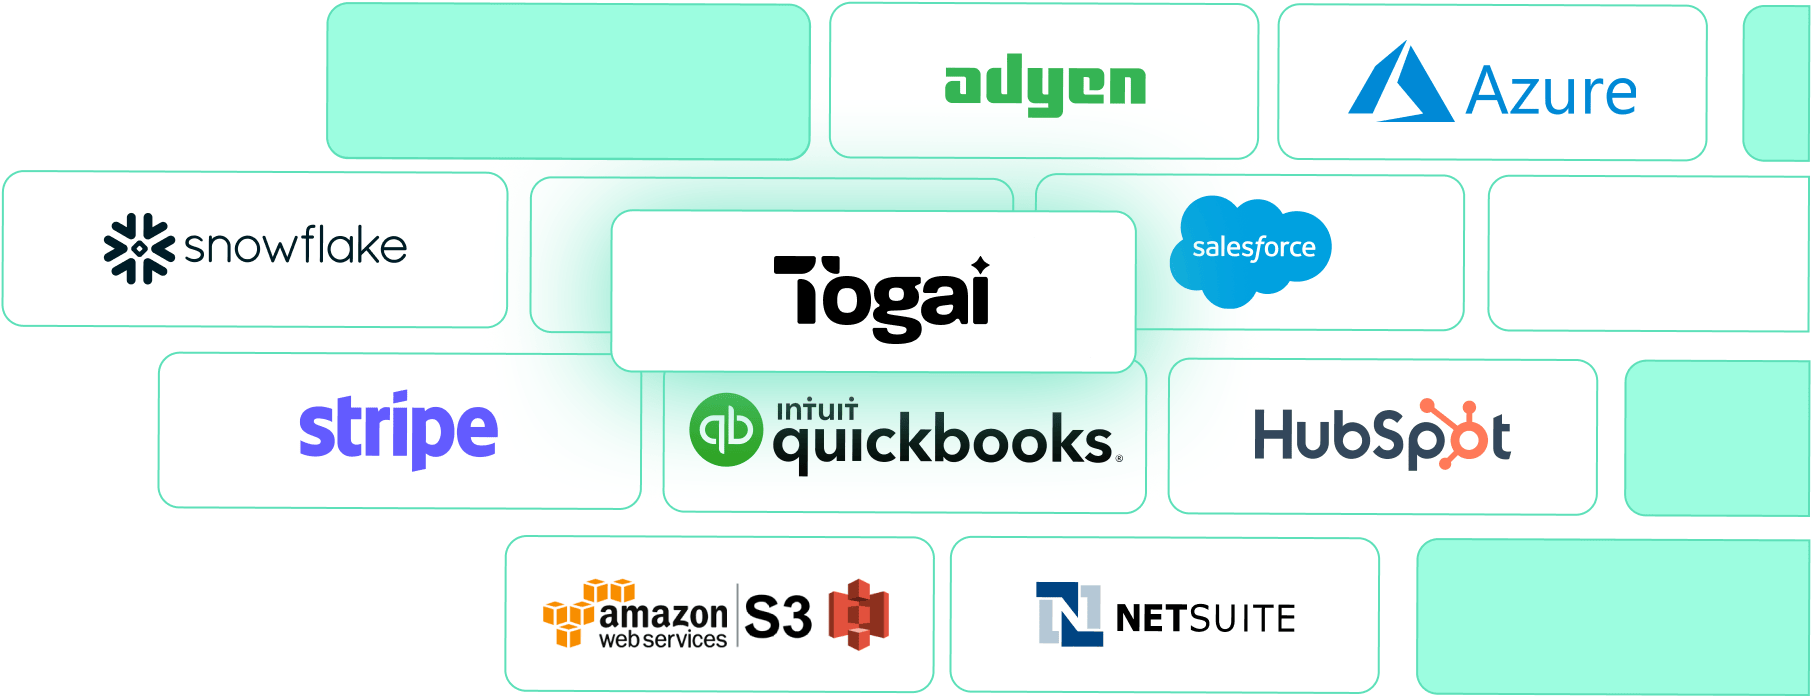 Image of the integrations supported by Togai.